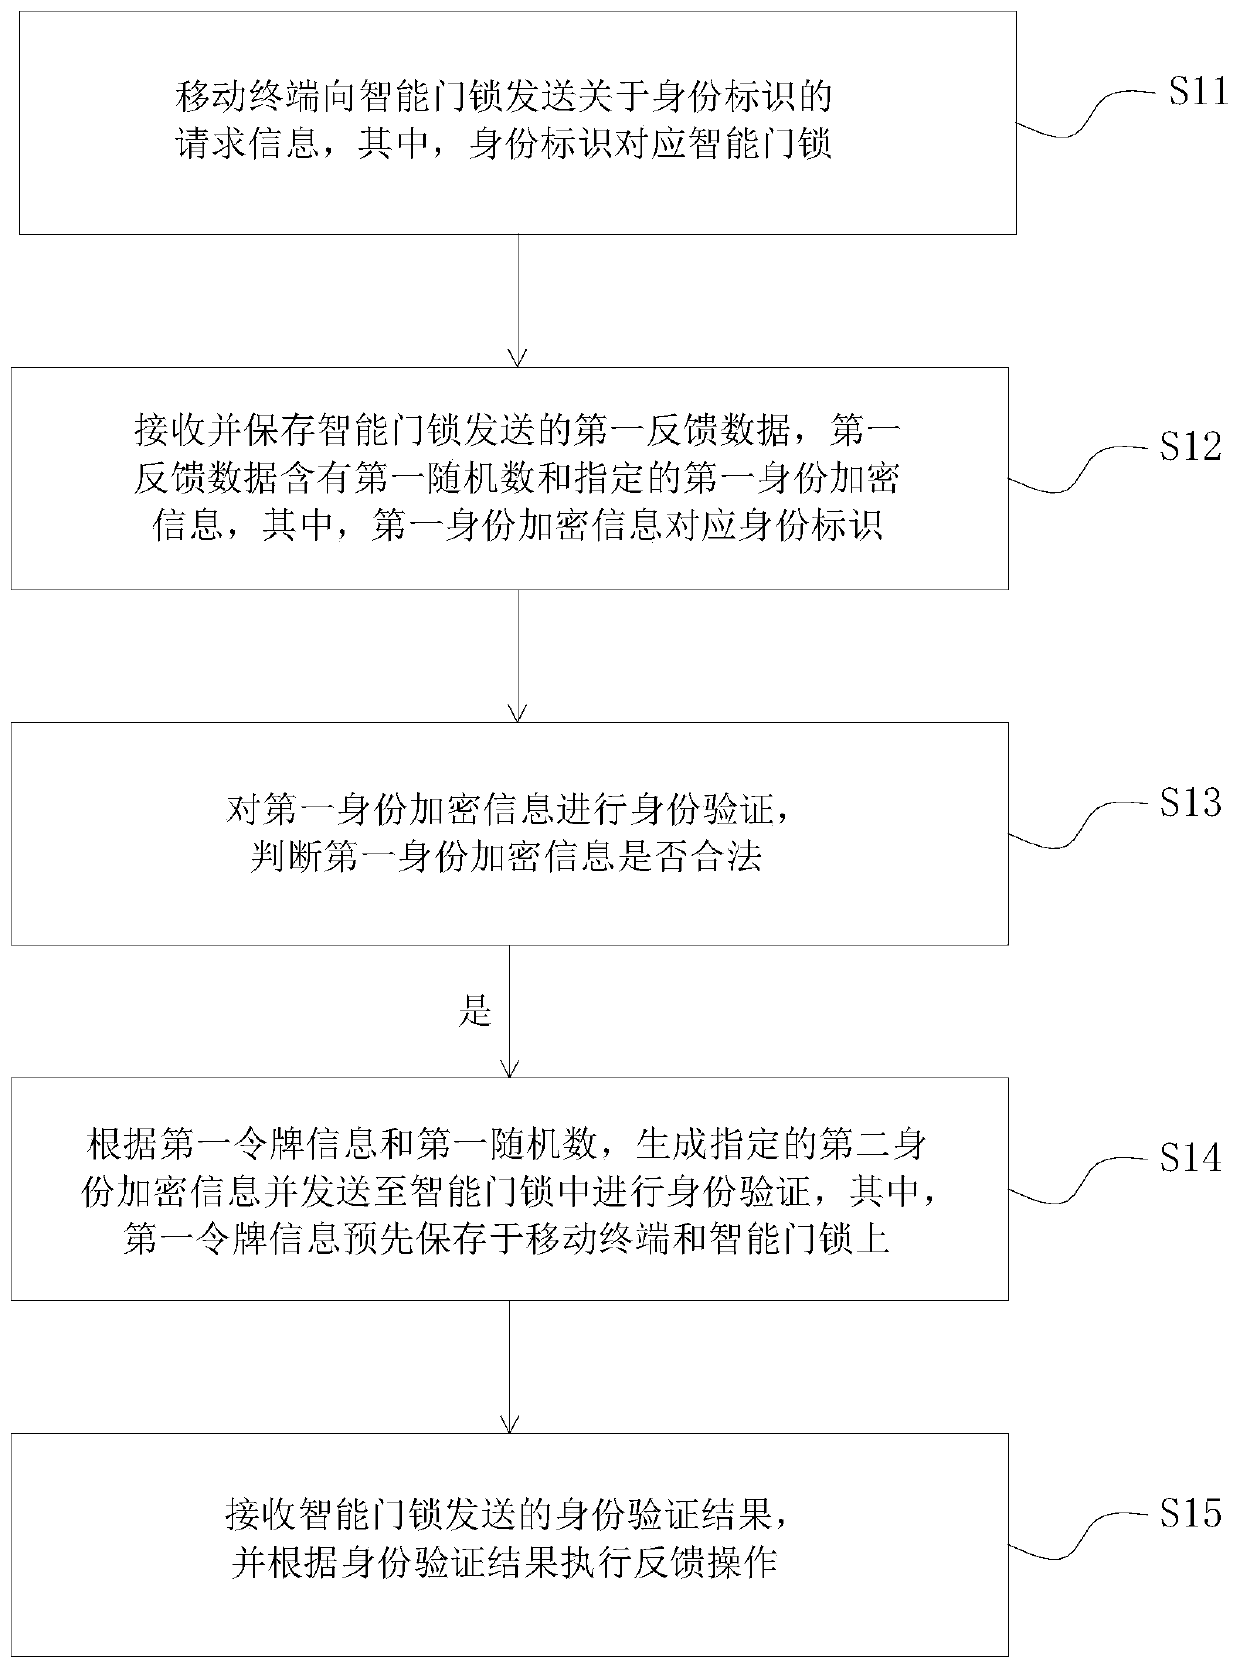 Intelligent door lock identity authentication method and system, readable storage medium and mobile terminal